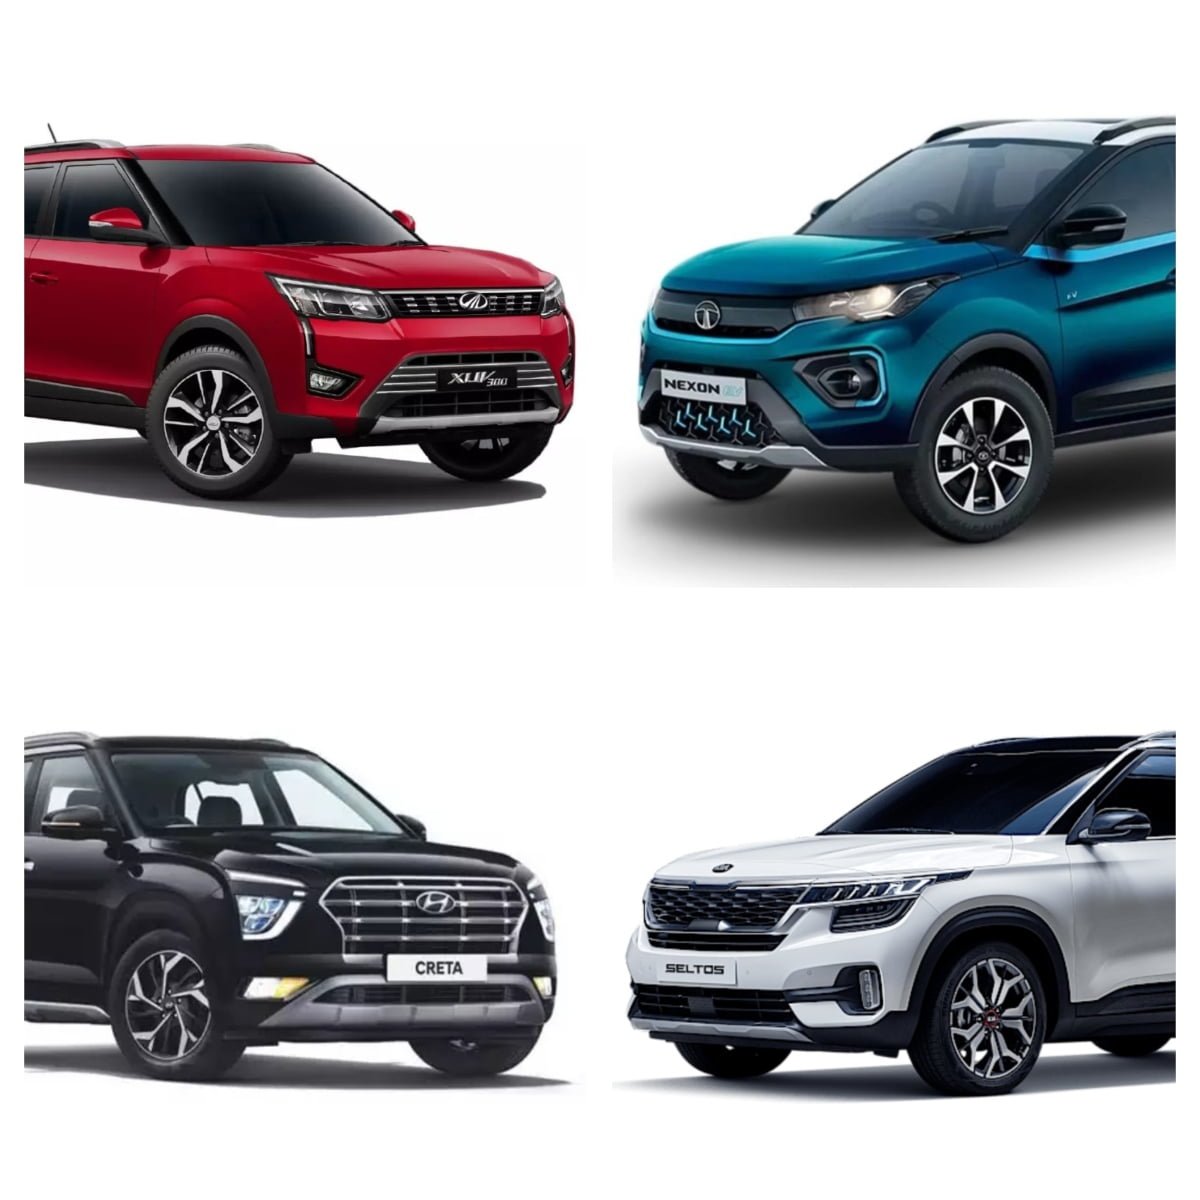 Top 5 Fuel Efficient Diesel Automatic SUVs in the Budget of Rs 1020 lakh